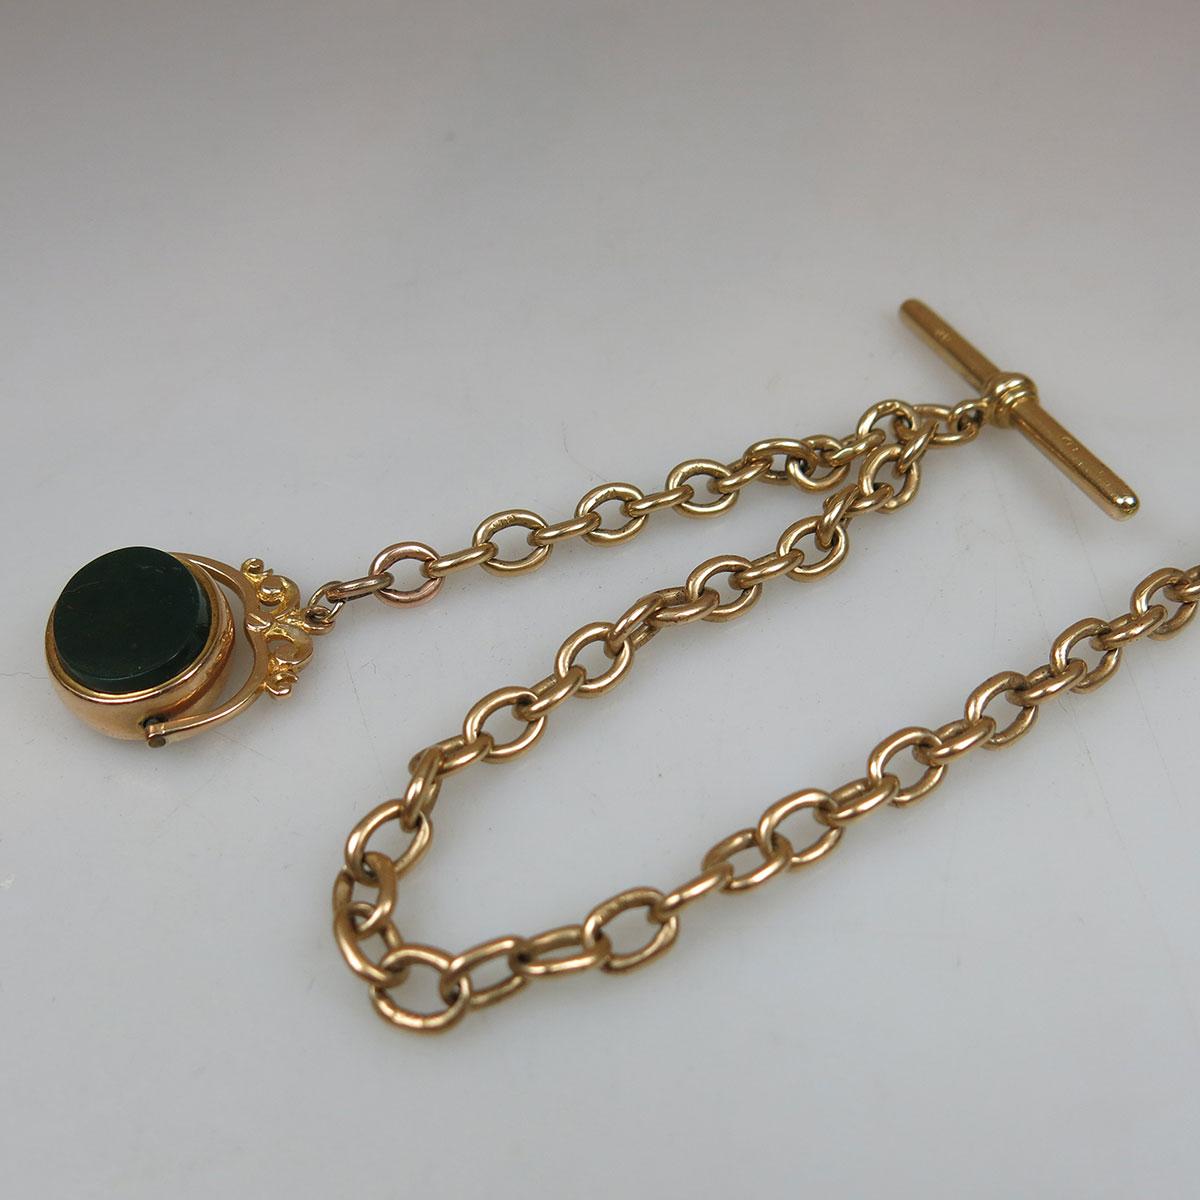 English 18k Yellow Gold Oval Link Watch Chain